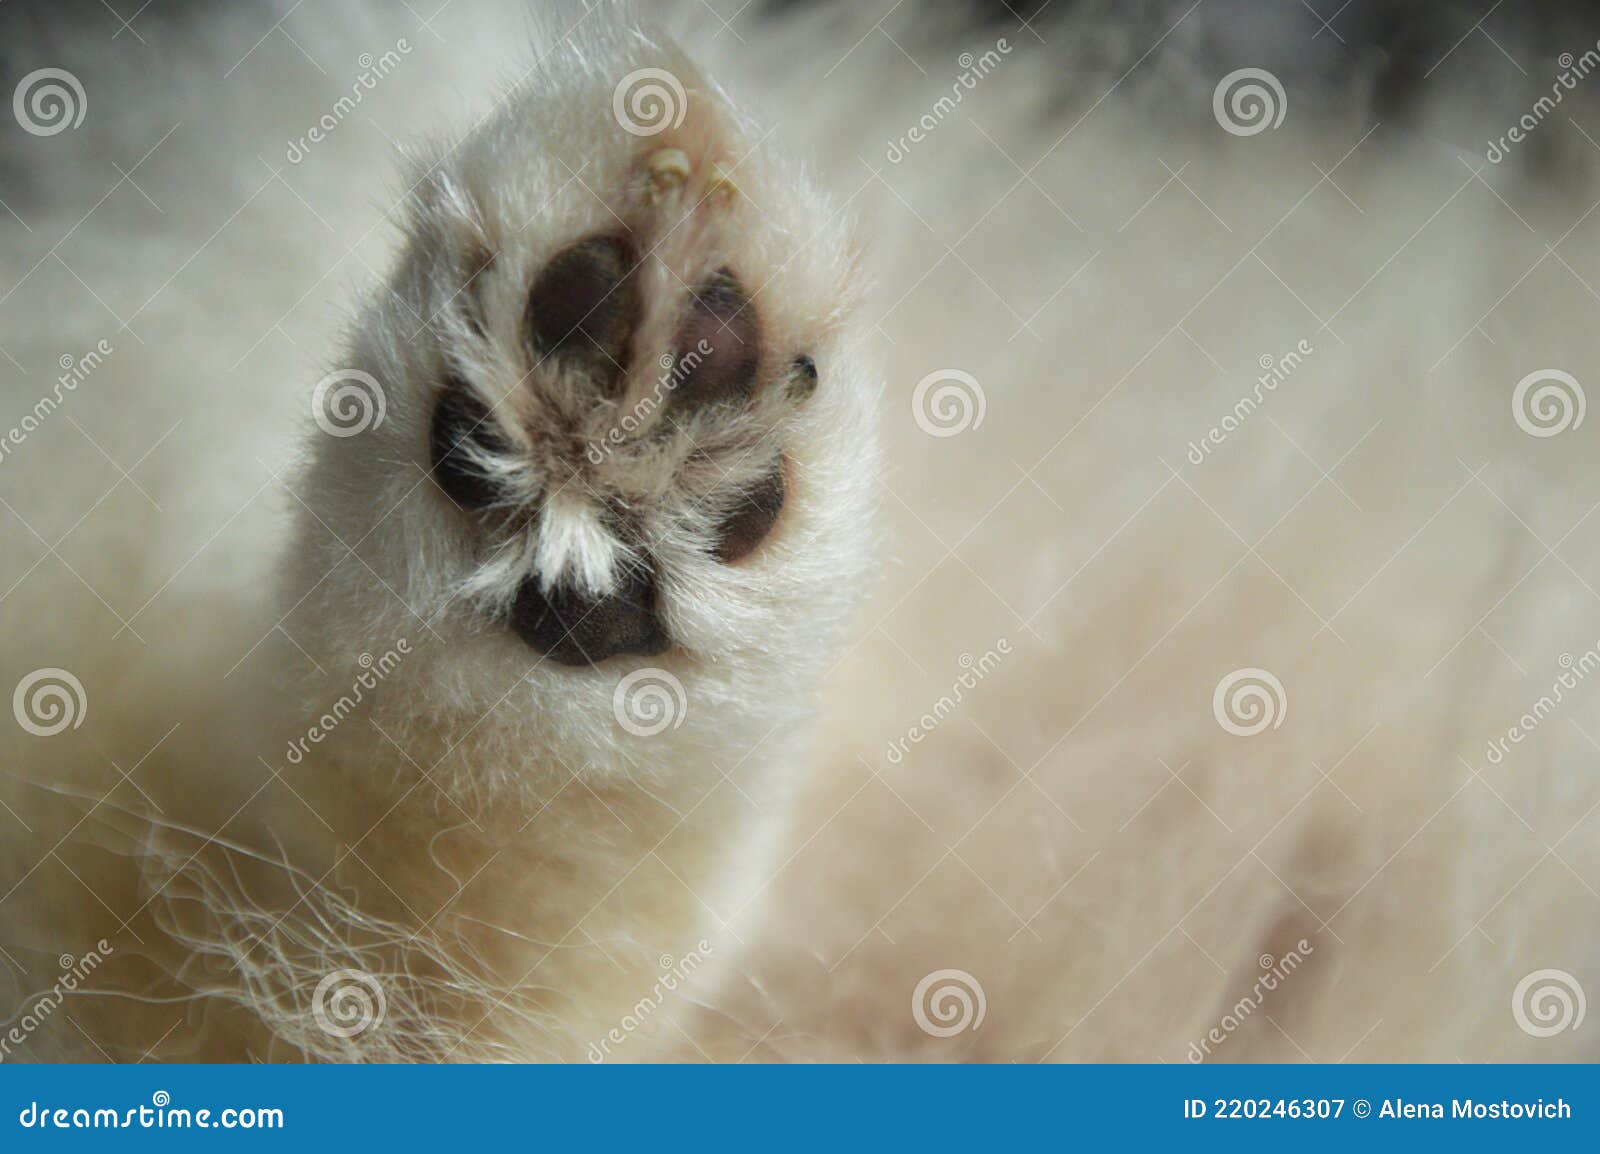 The Furry Paw of a Small White a Pet. Stock Image - Image of pets, feline: 220246307